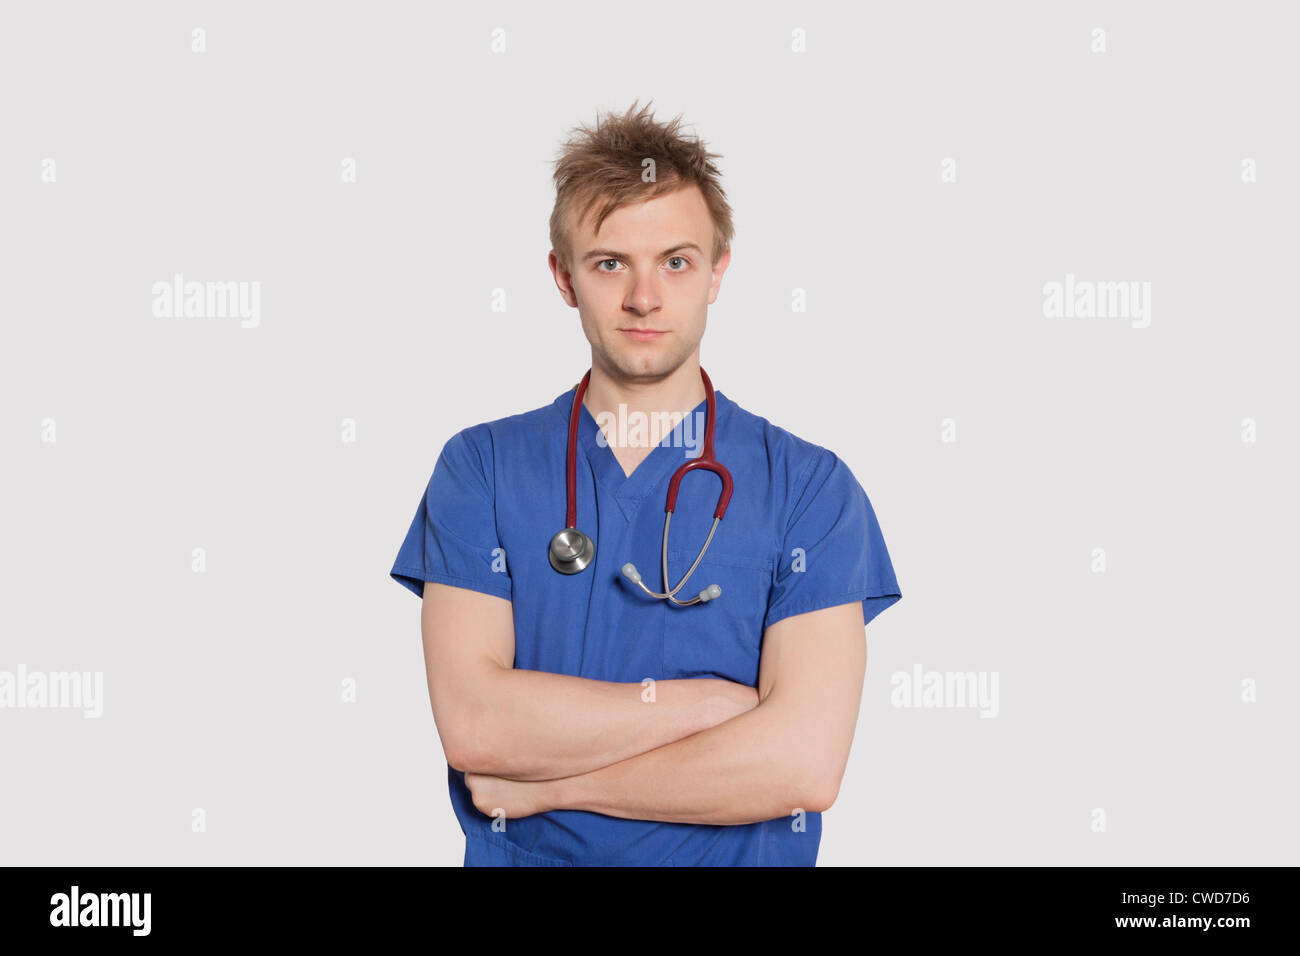 Portrait of a serious male surgeon standing with arms crossed over gray background Stock Photo